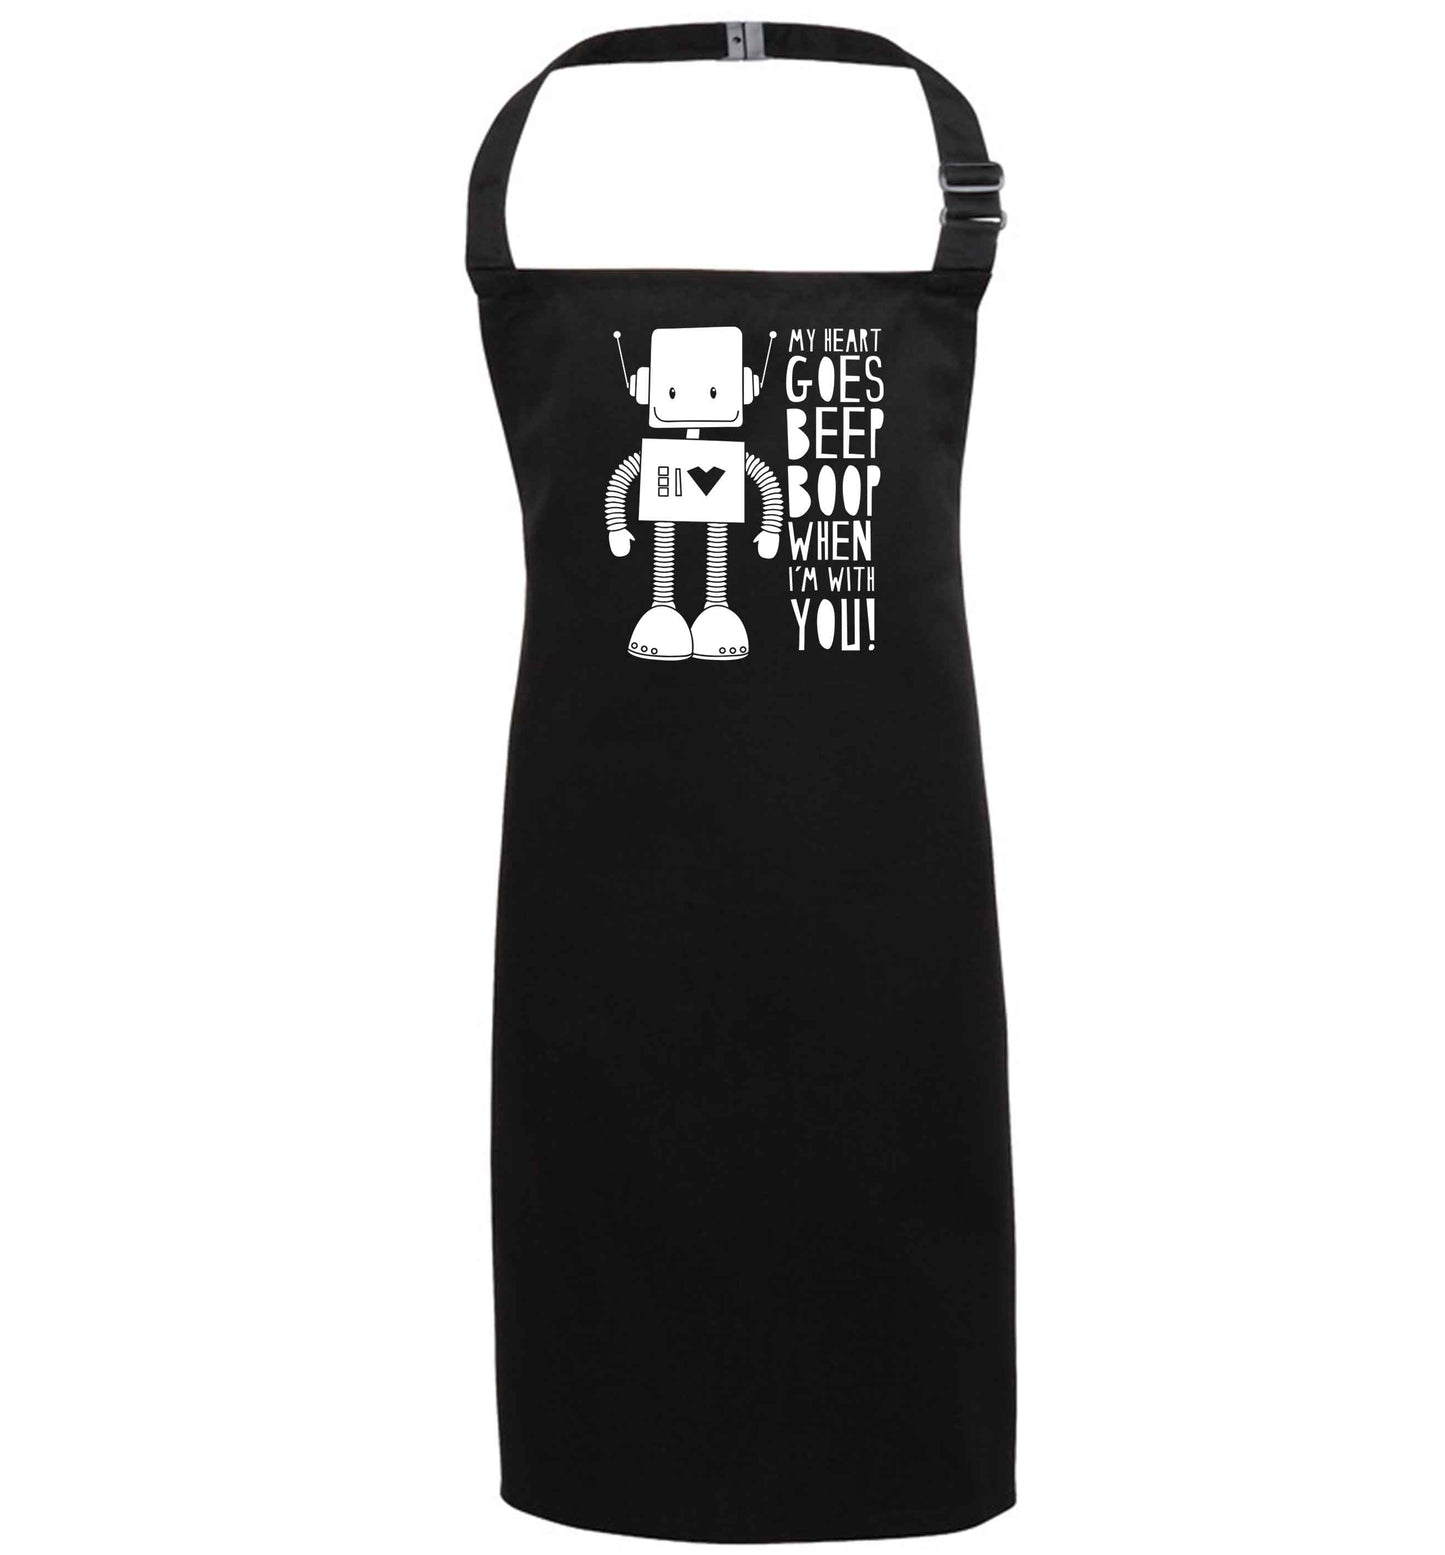 My heart goes beep boop when I'm with you black apron 7-10 years